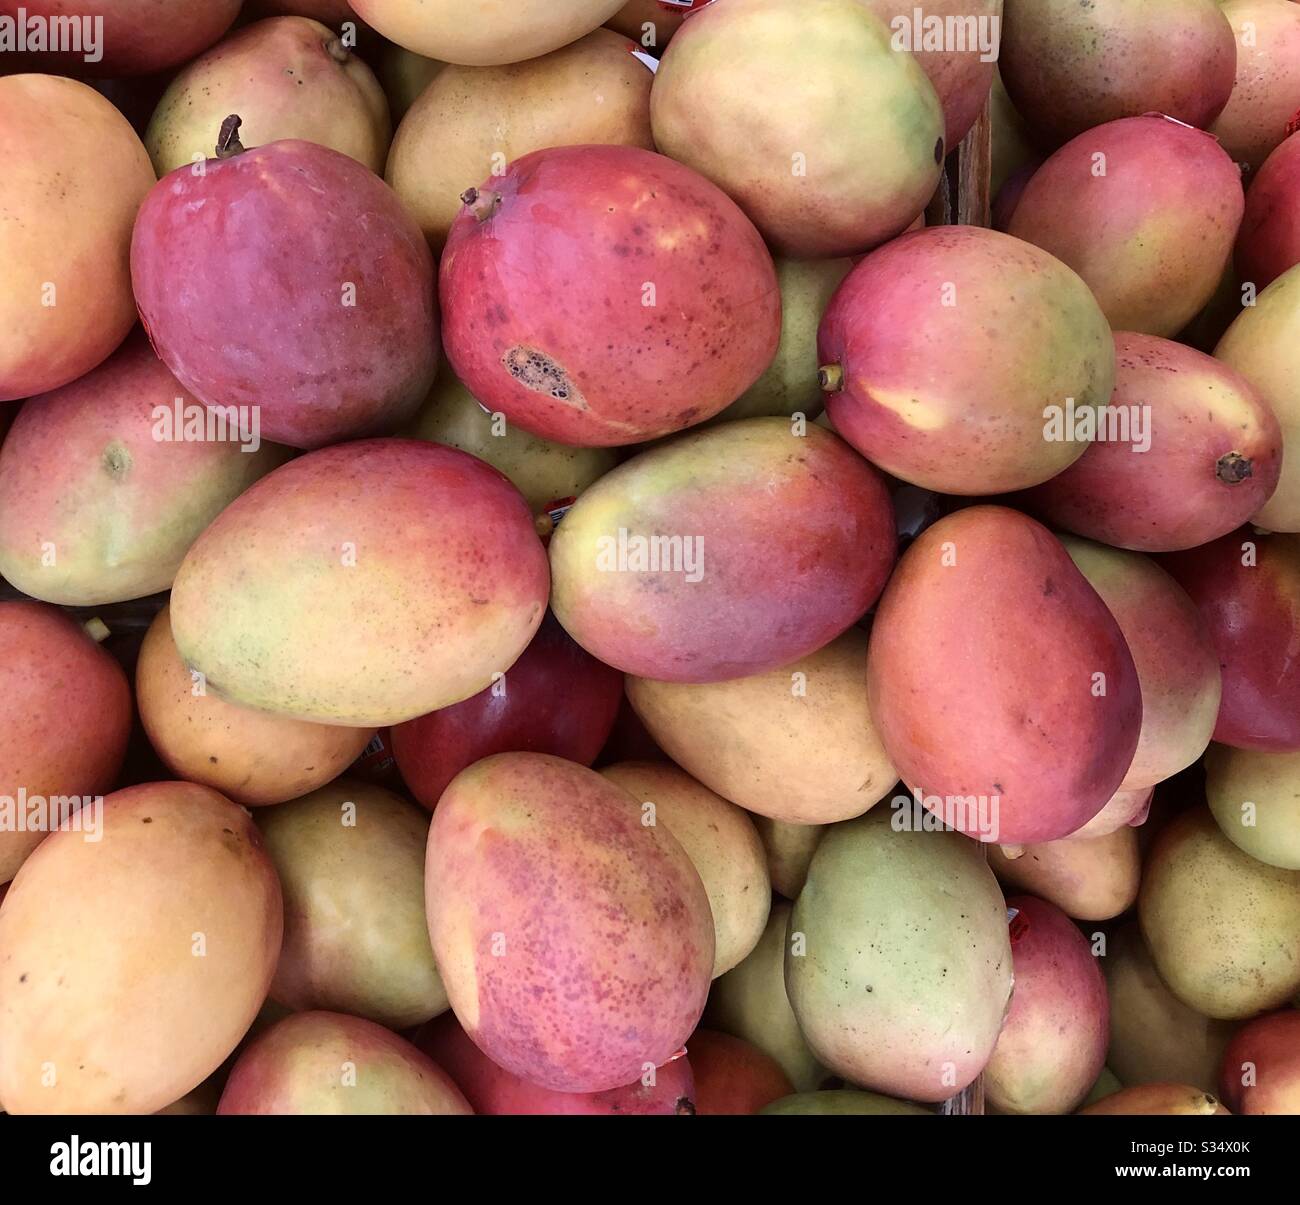 Red Mangos, store grouping, red, yellow, green colors, fruit, tasty, yellow inside, nutritional, healthy, plain, salsas, smoothies, other recipes, closeup Stock Photo